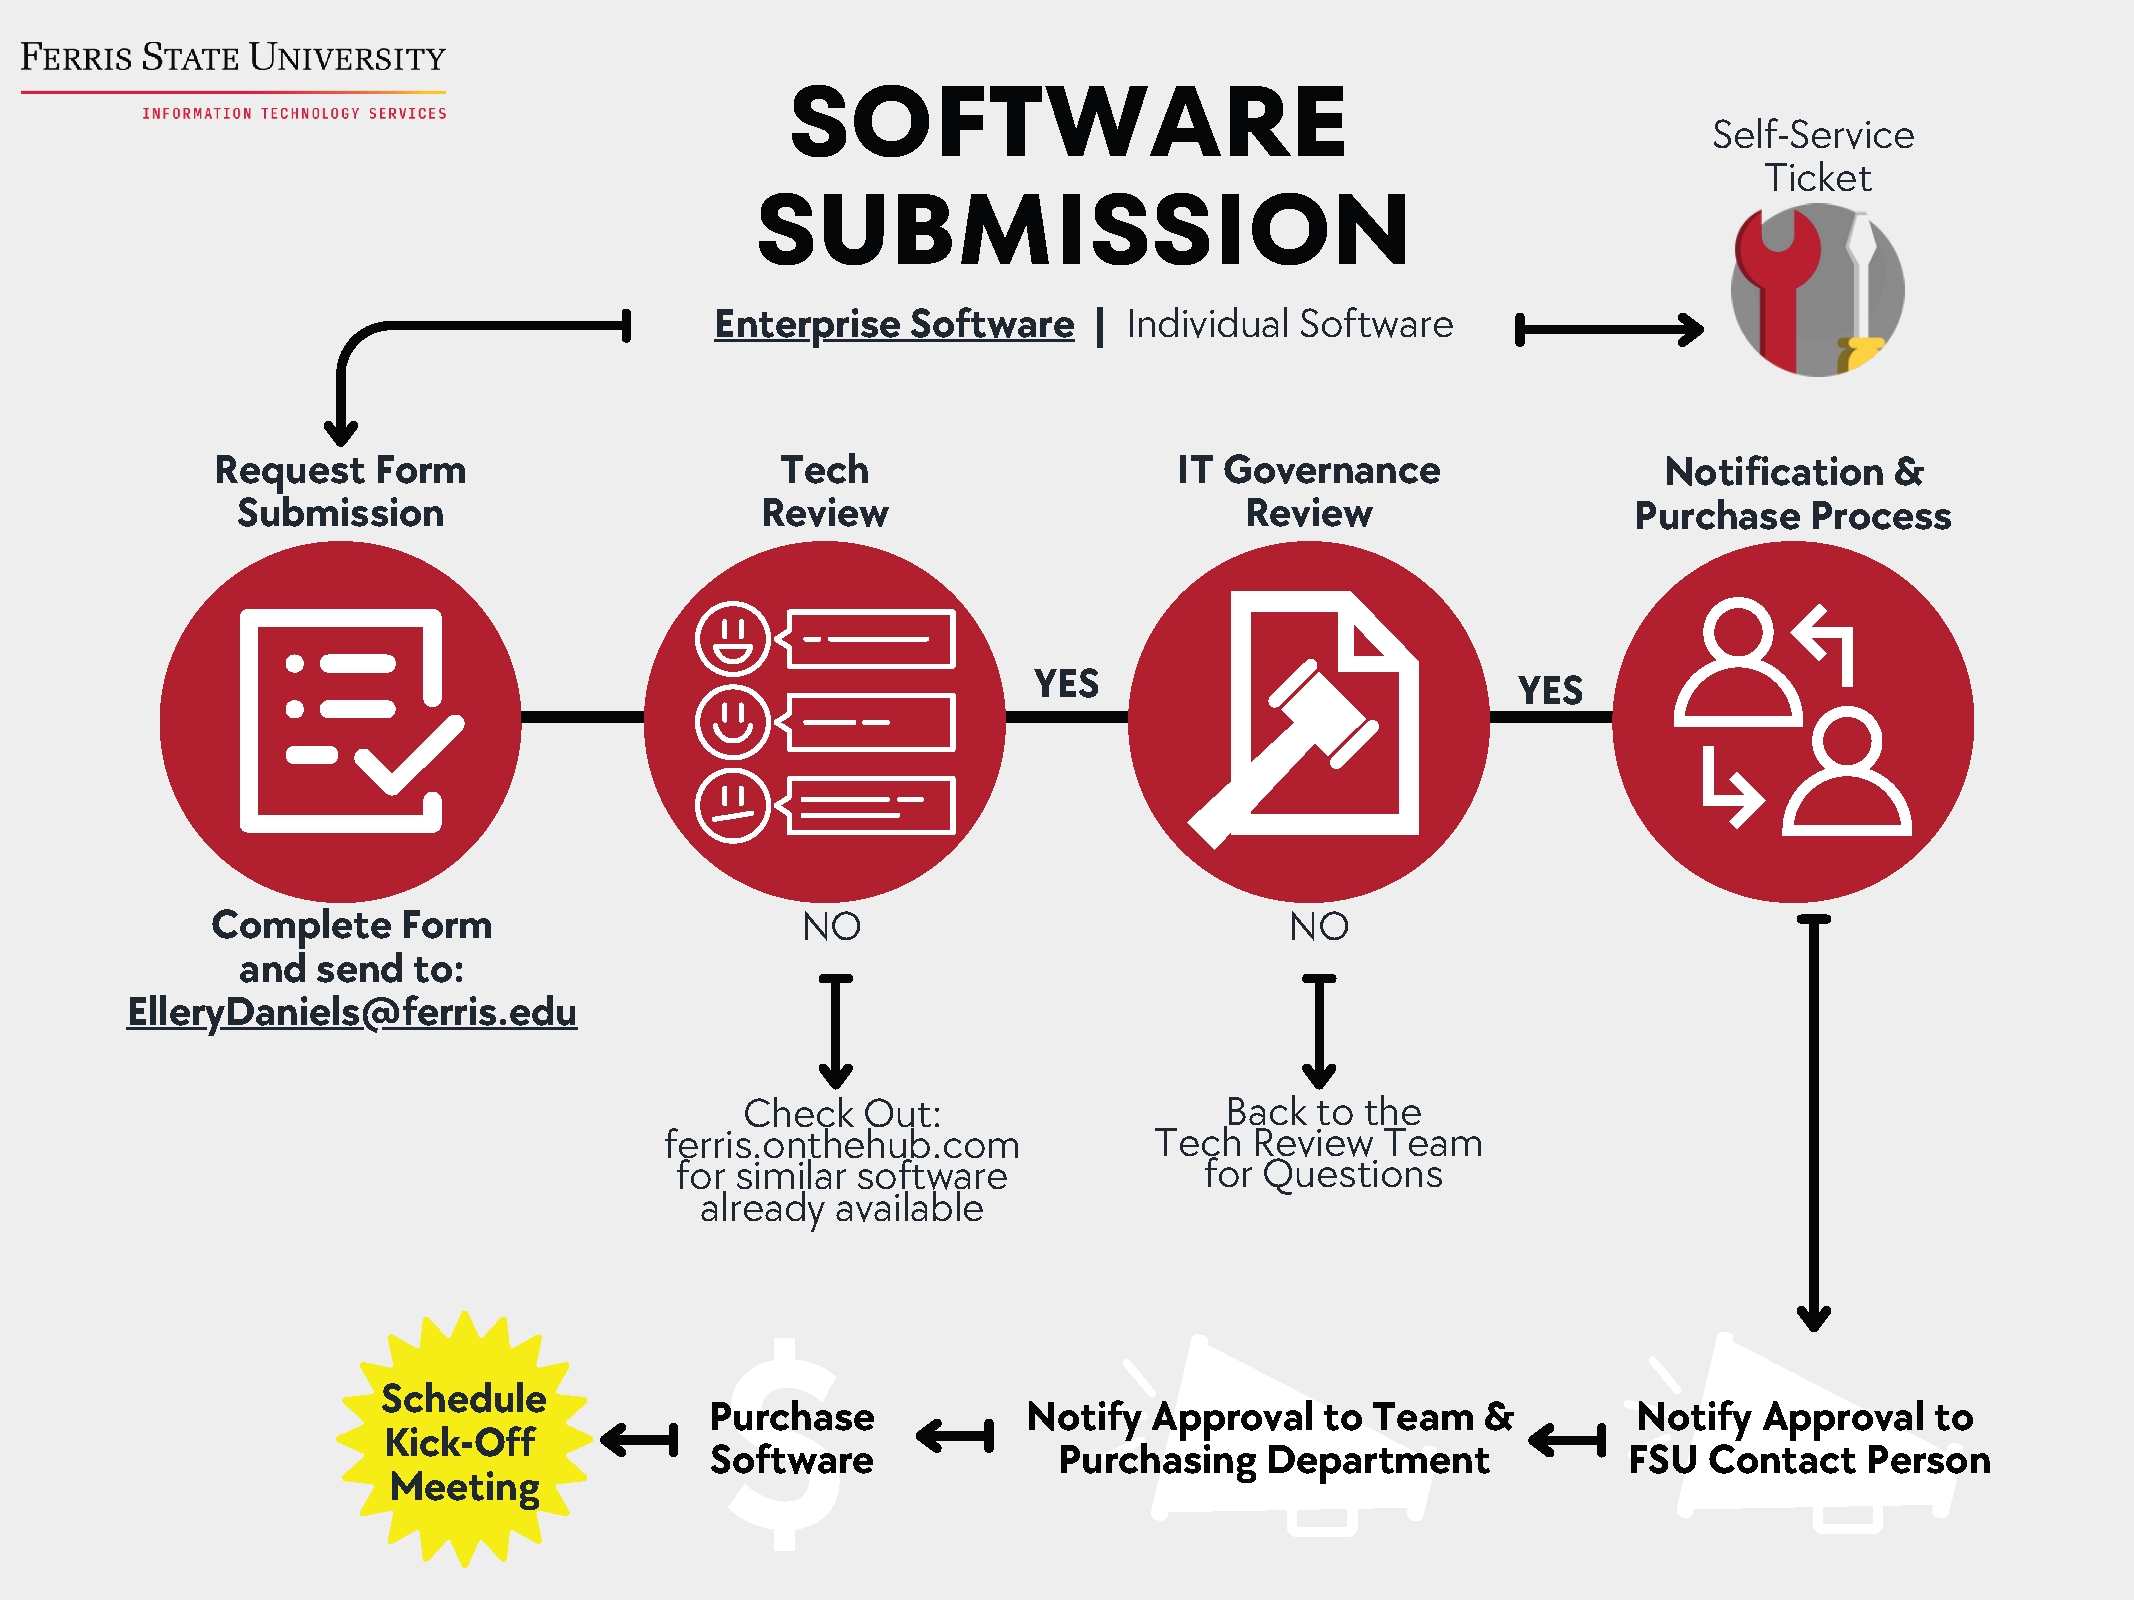 Graphic demonstrating the software submission process. The process is described in text below.